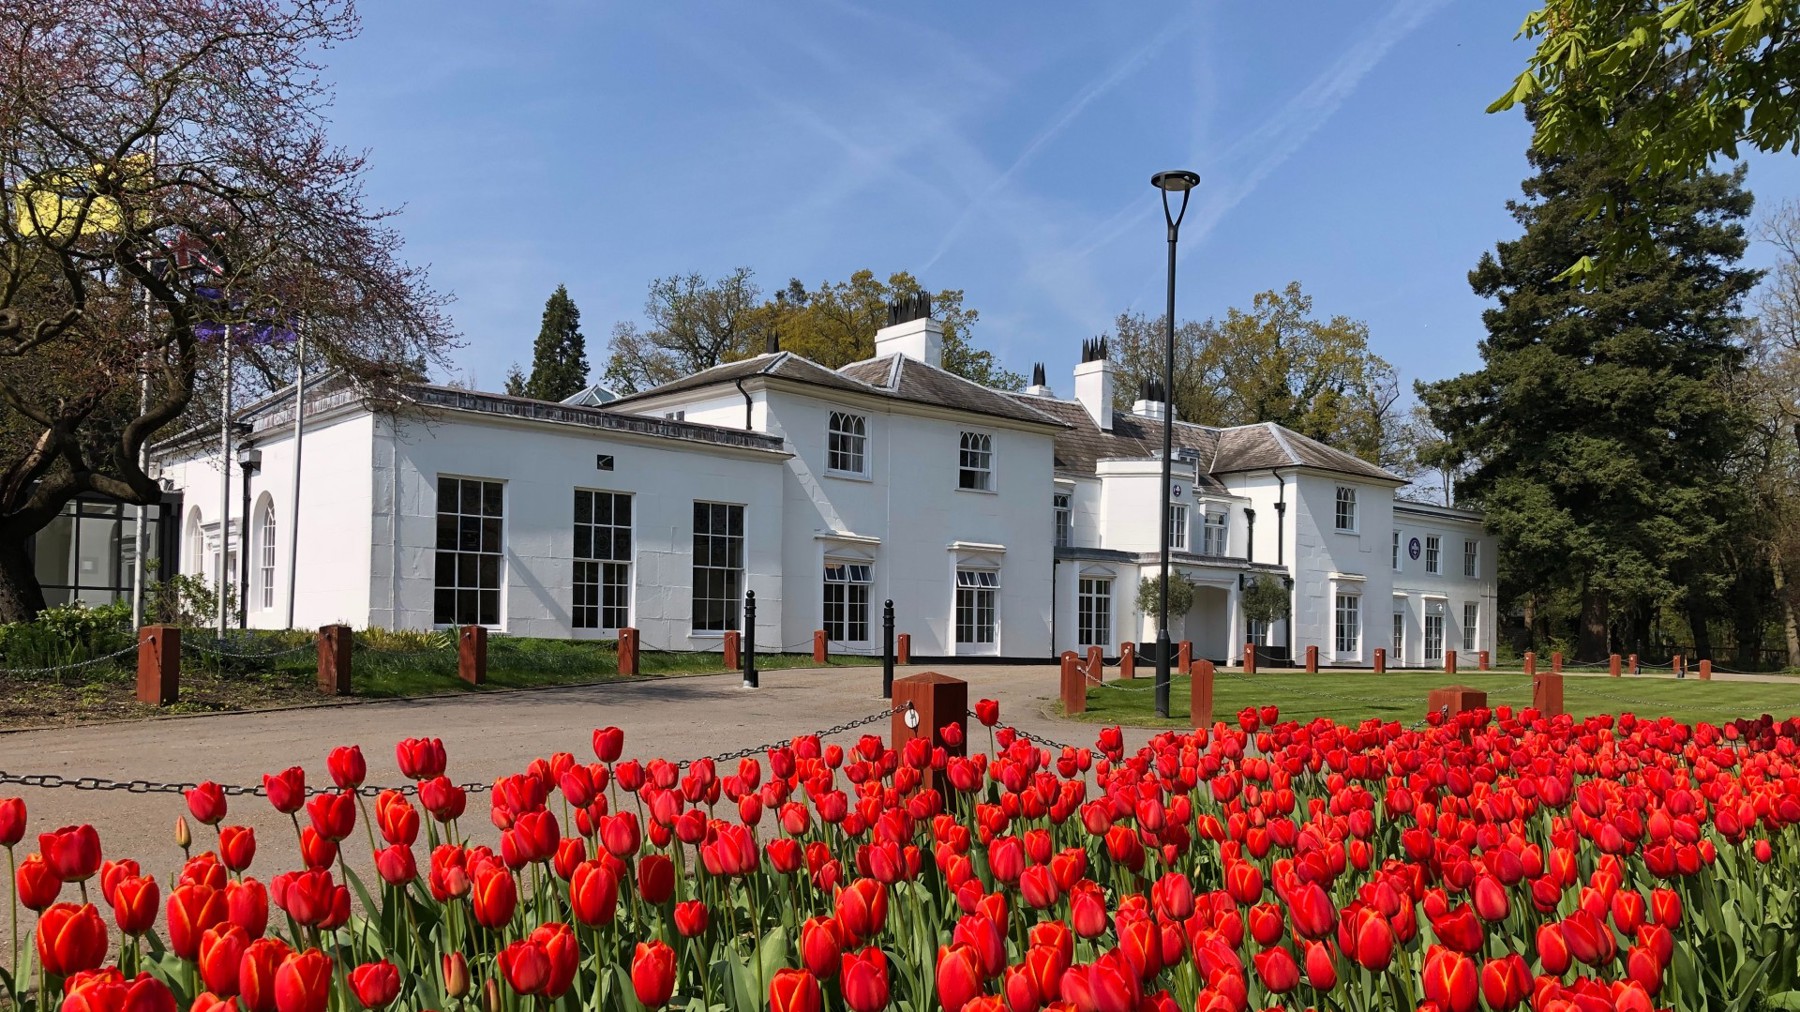 The exterior of the White House at Gilwell Park with red tulips in front